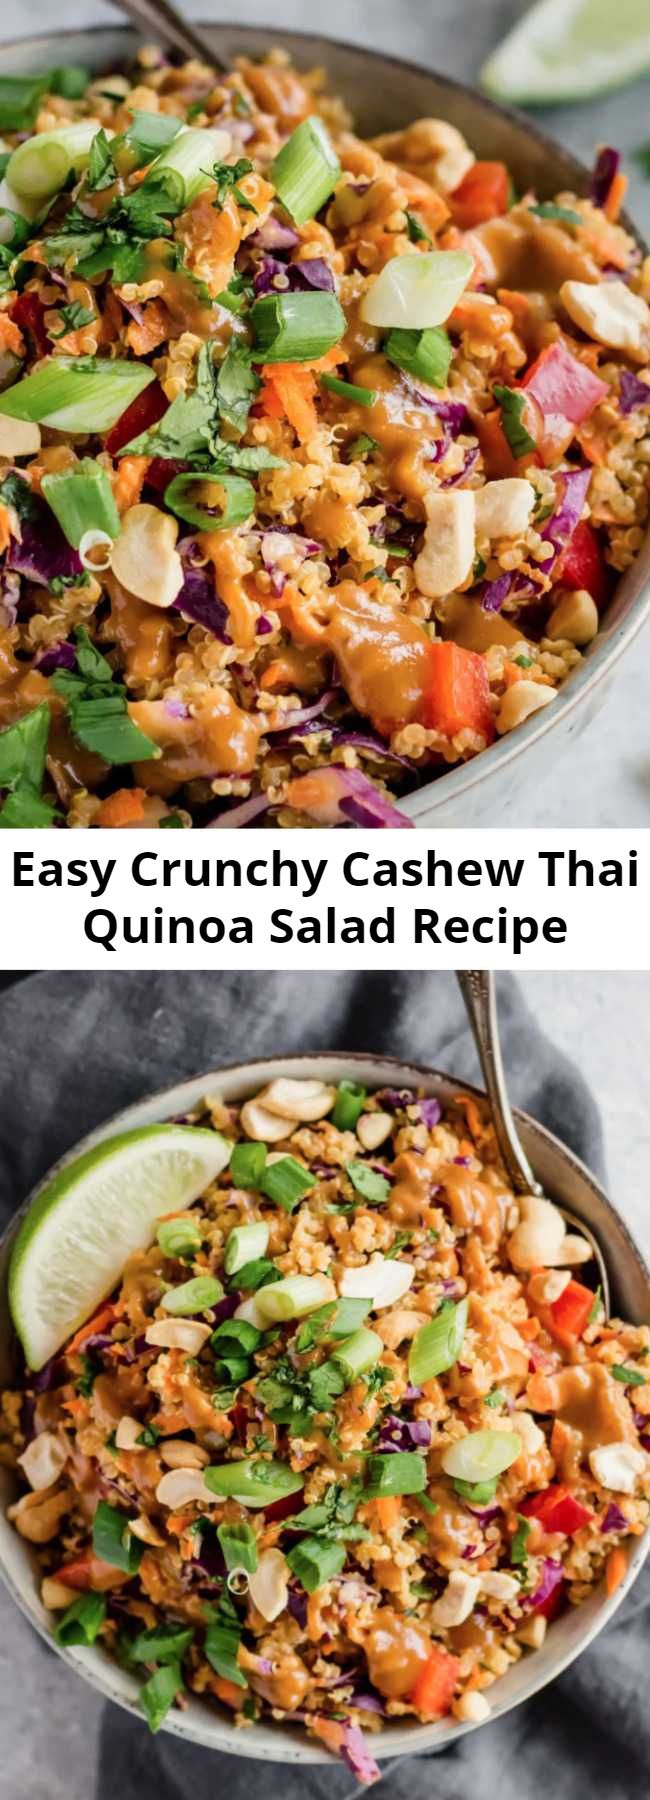 Easy Crunchy Cashew Thai Quinoa Salad Recipe - Delicious vegan and easily gluten-free salad with Thai flavors and a perfect crunch. It's even better the next day! #veganrecipe #veganfood #thaifood #vegetarian #plantbased #healthylunch #lunchideas #mealprep #mealprepping #glutenfree #glutenfreerecipes